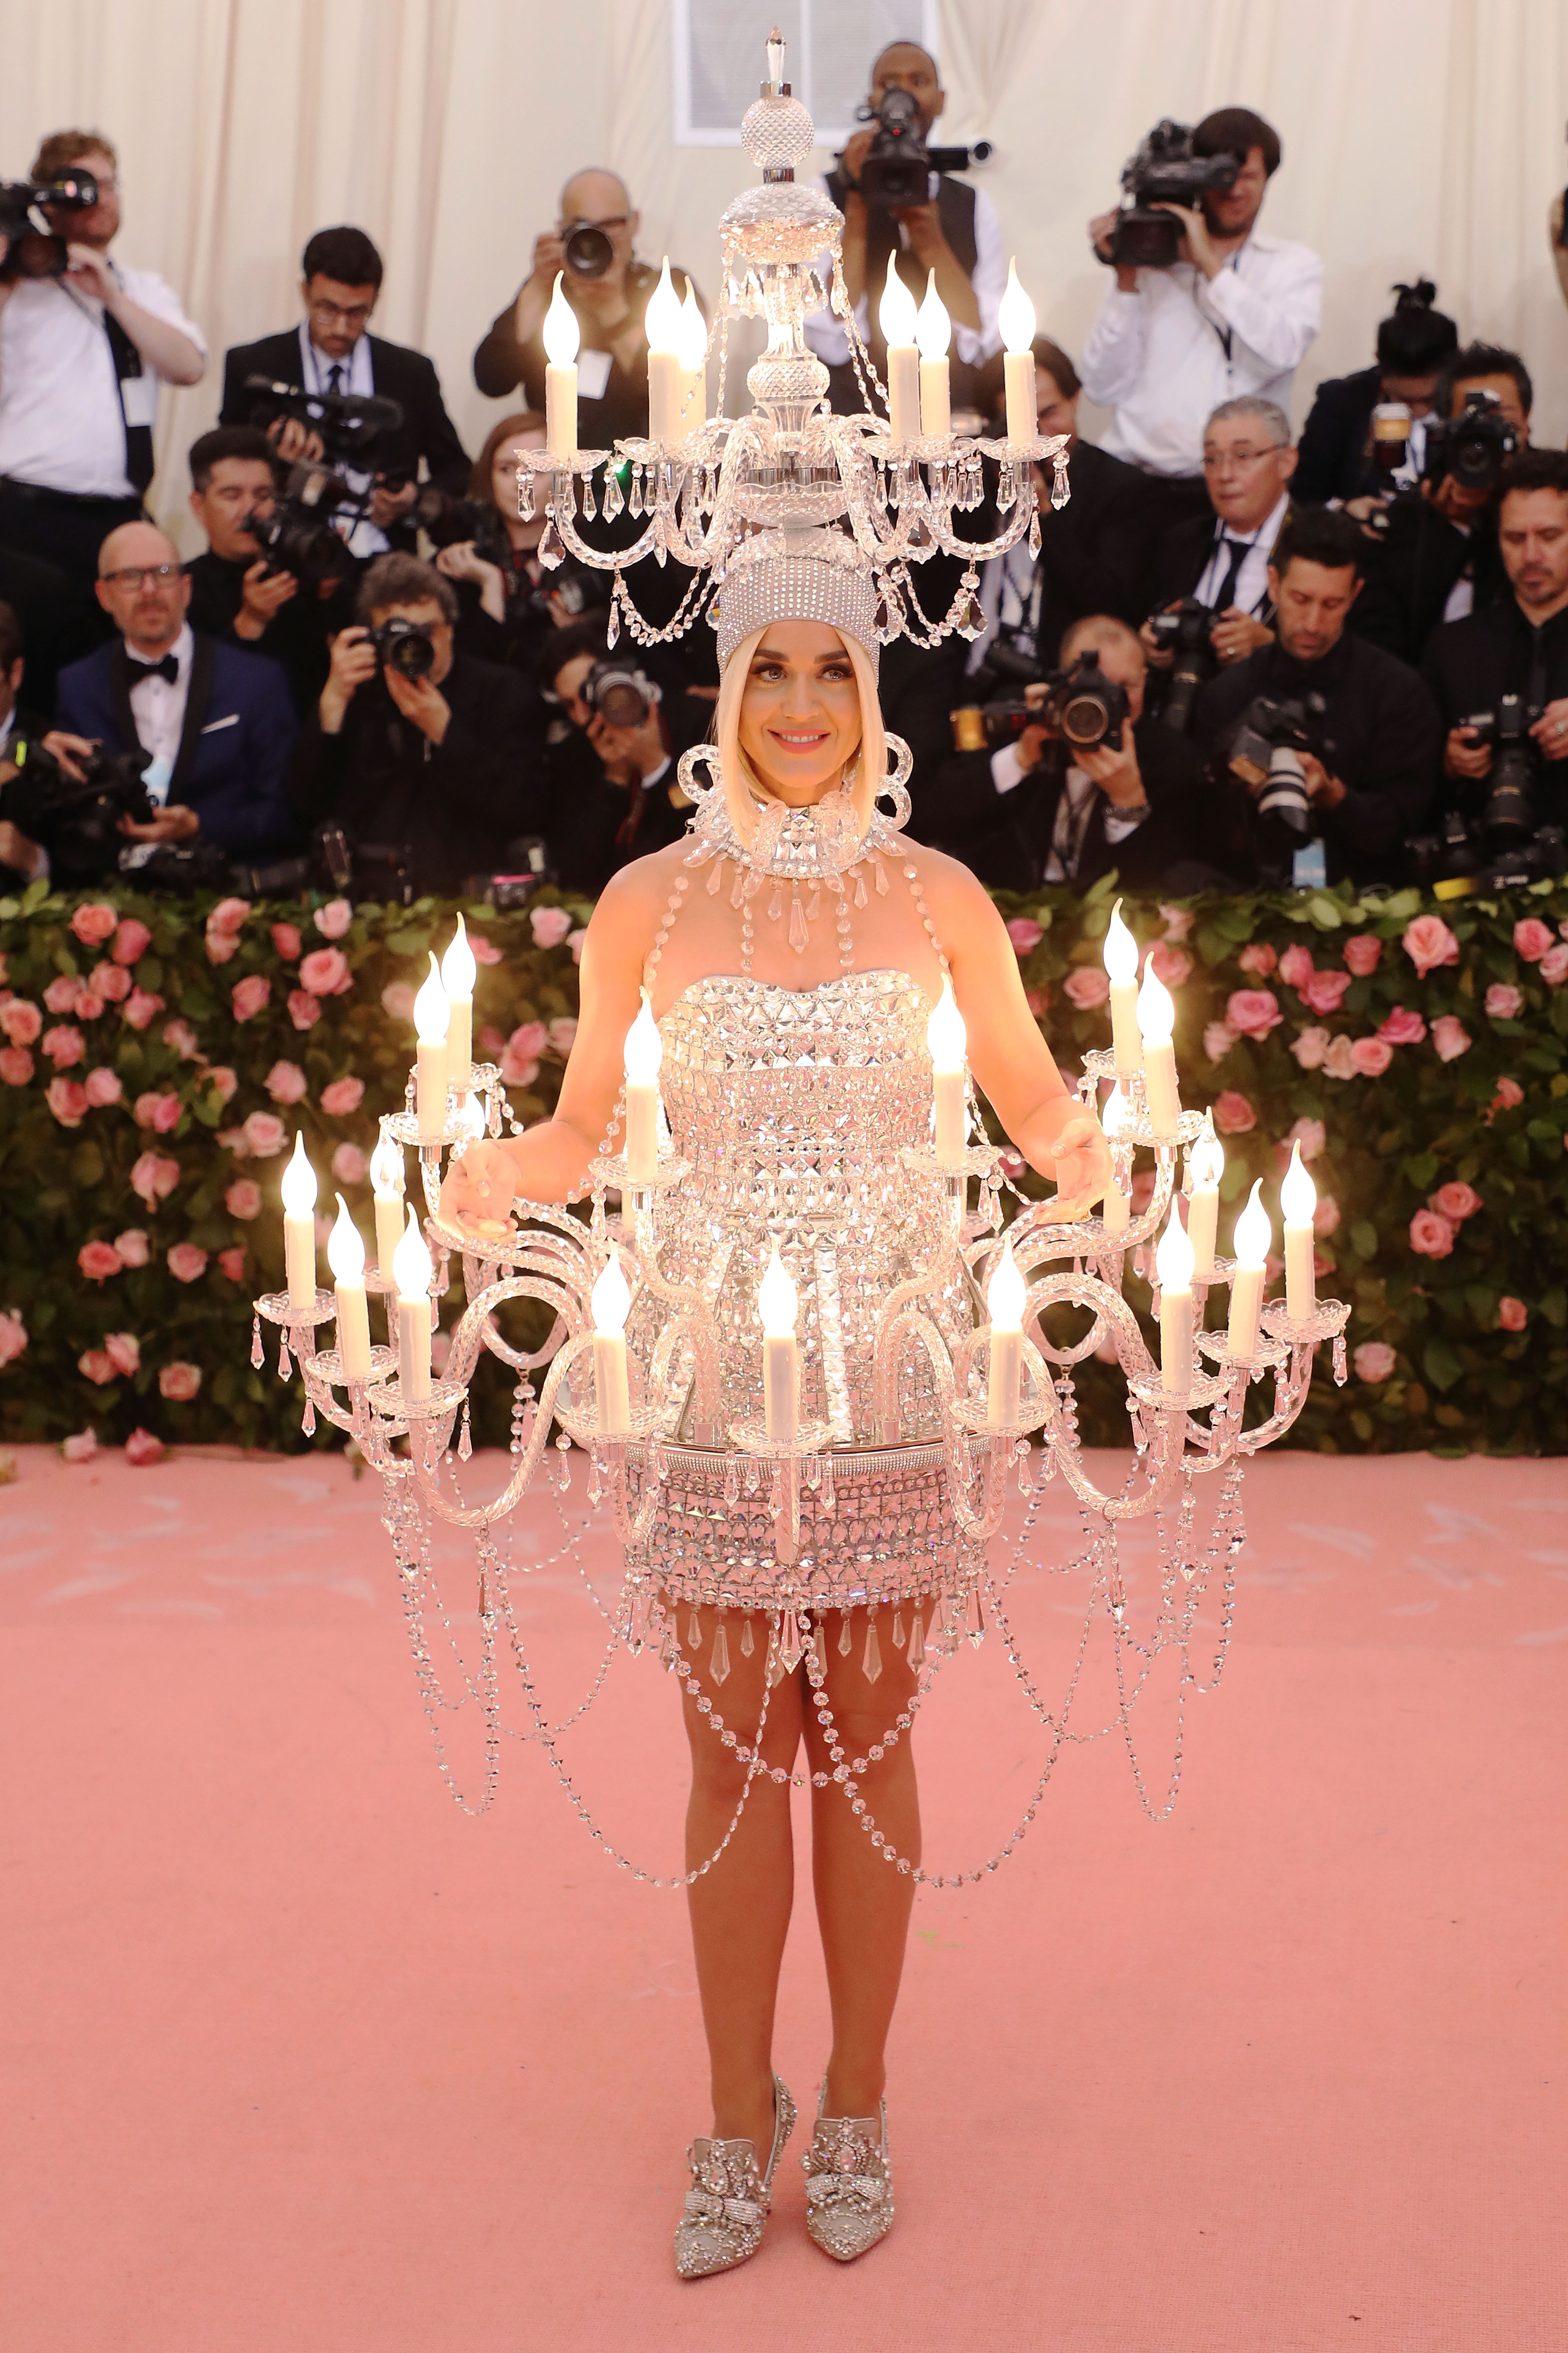 Katy Perry attends The 2019 Met Gala at Metropolitan Museum of Art on May 6, 2019 in New York City. | Source: Getty Images